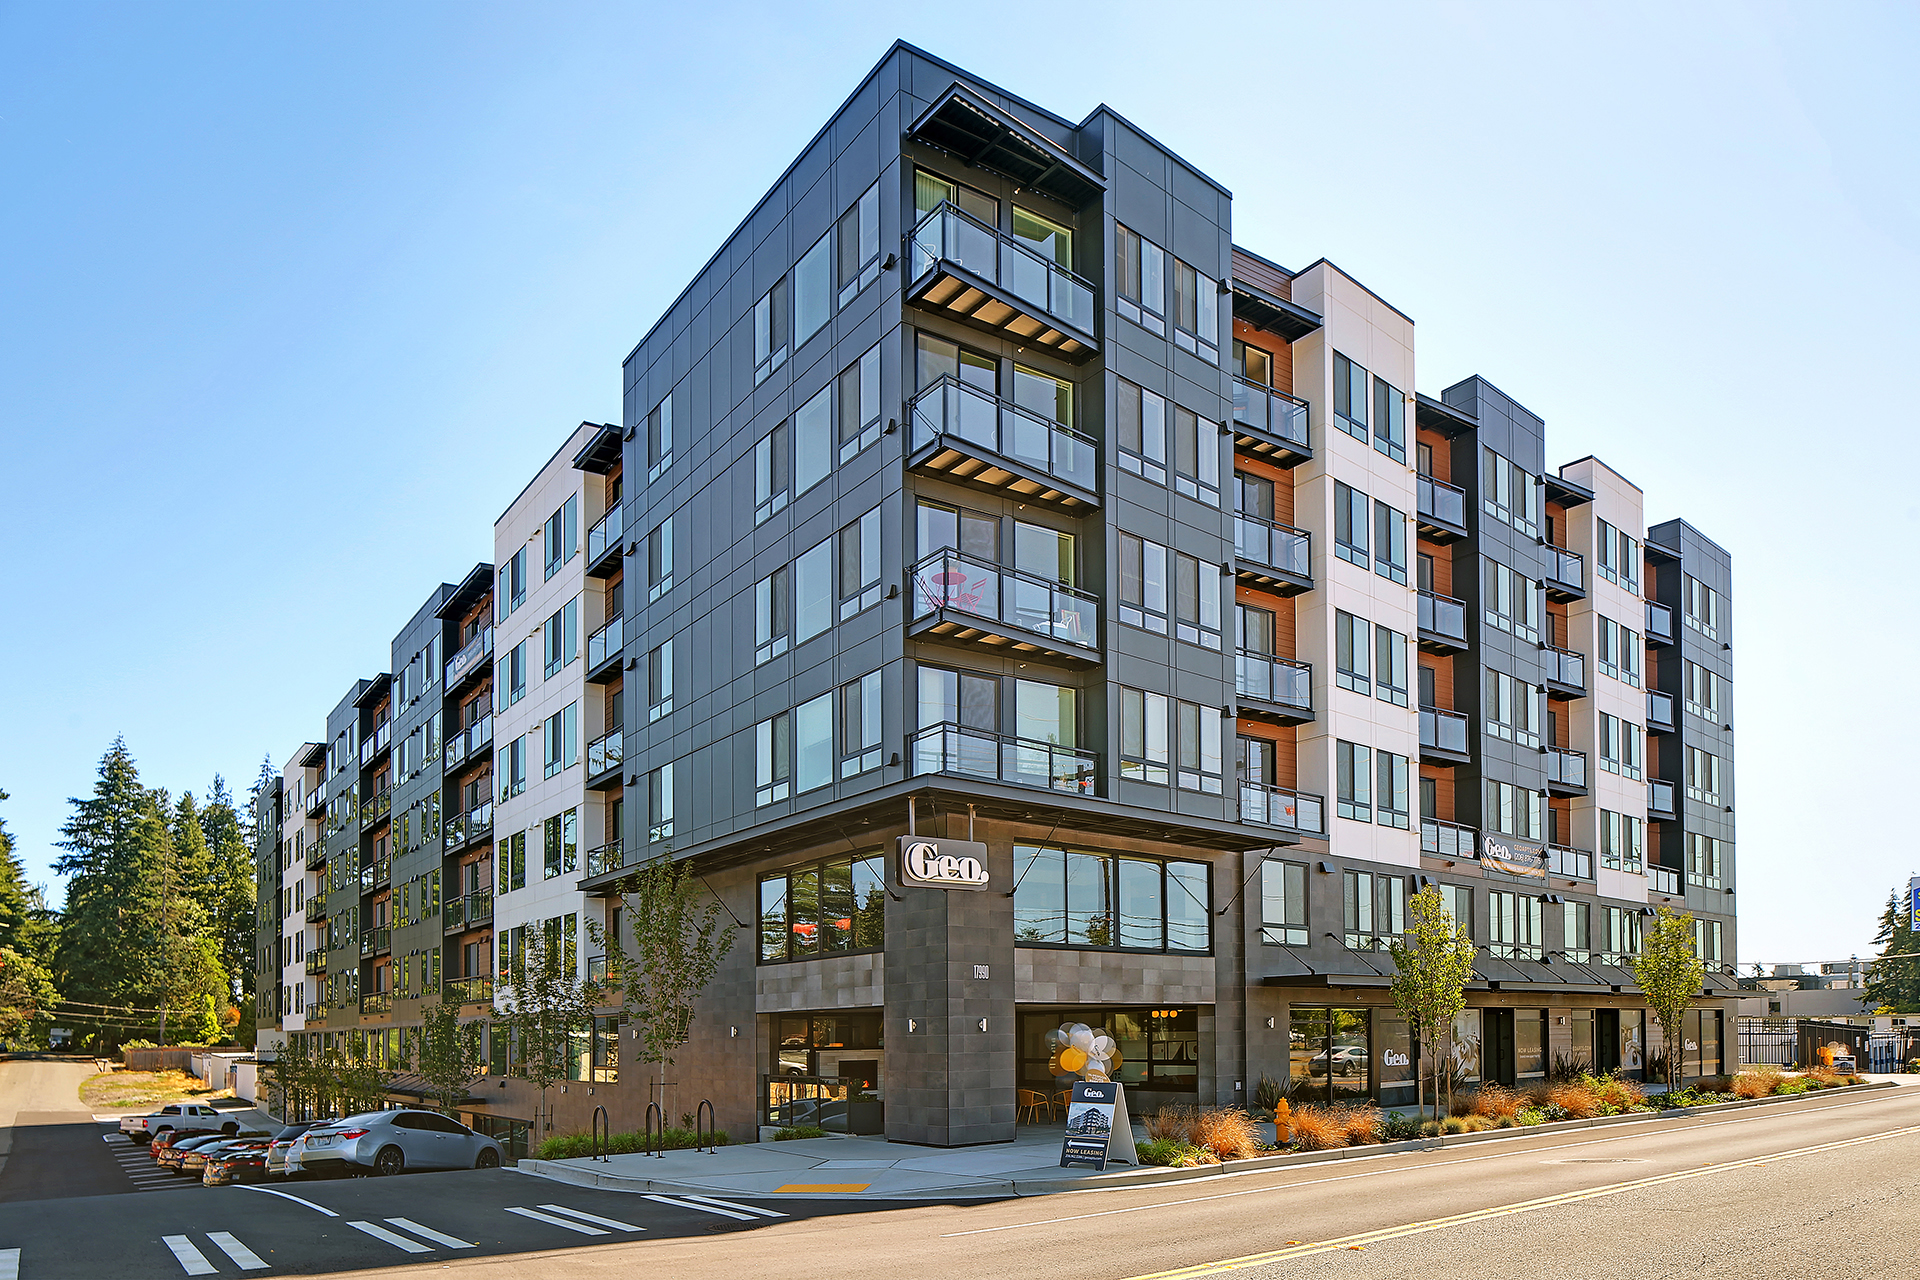 The King County multi-family residential development GEO Apartments, designed by Seattle apartment architect AXIS/GFA